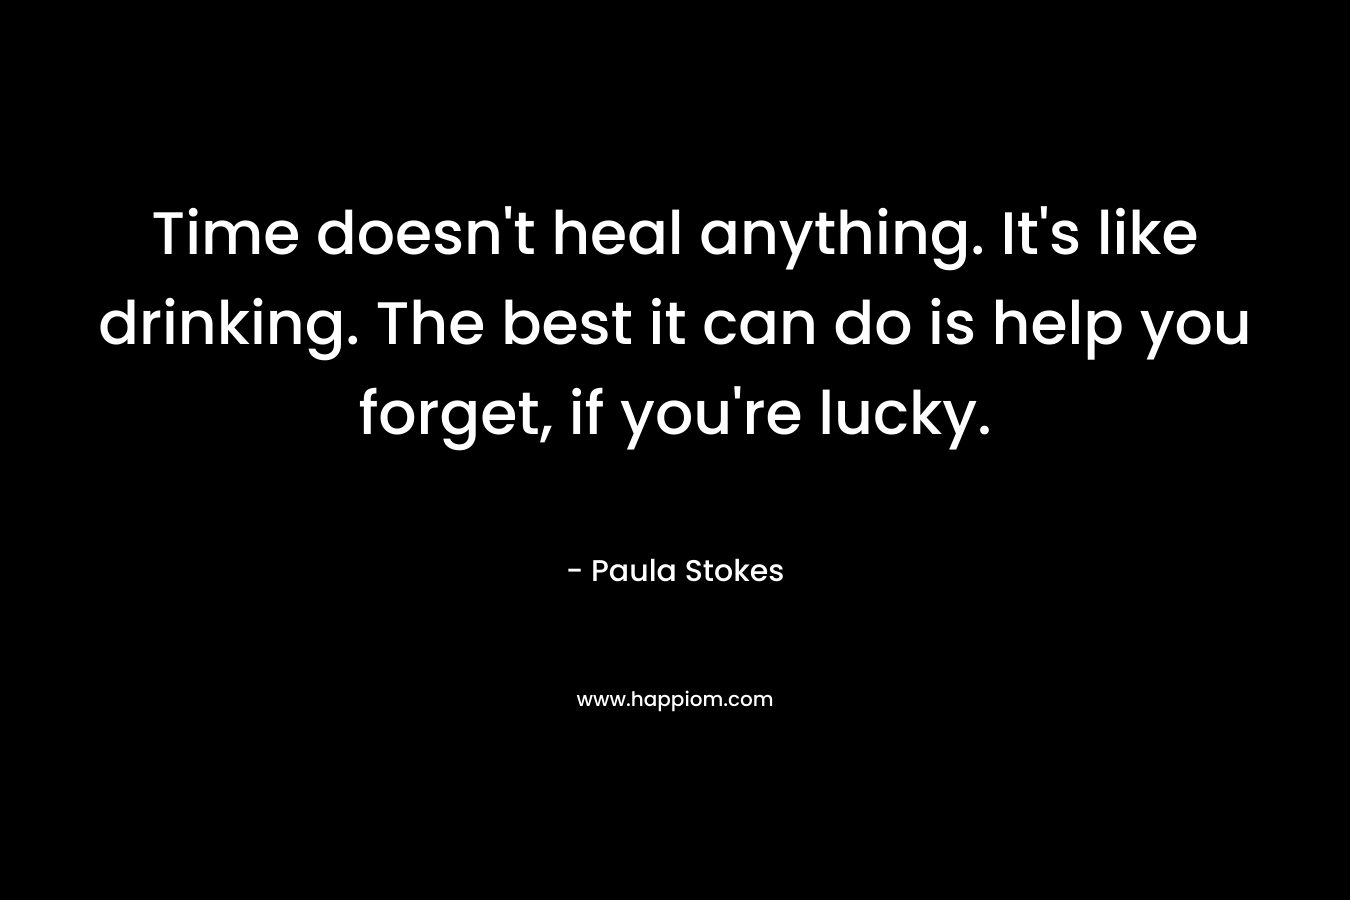 Time doesn't heal anything. It's like drinking. The best it can do is help you forget, if you're lucky.